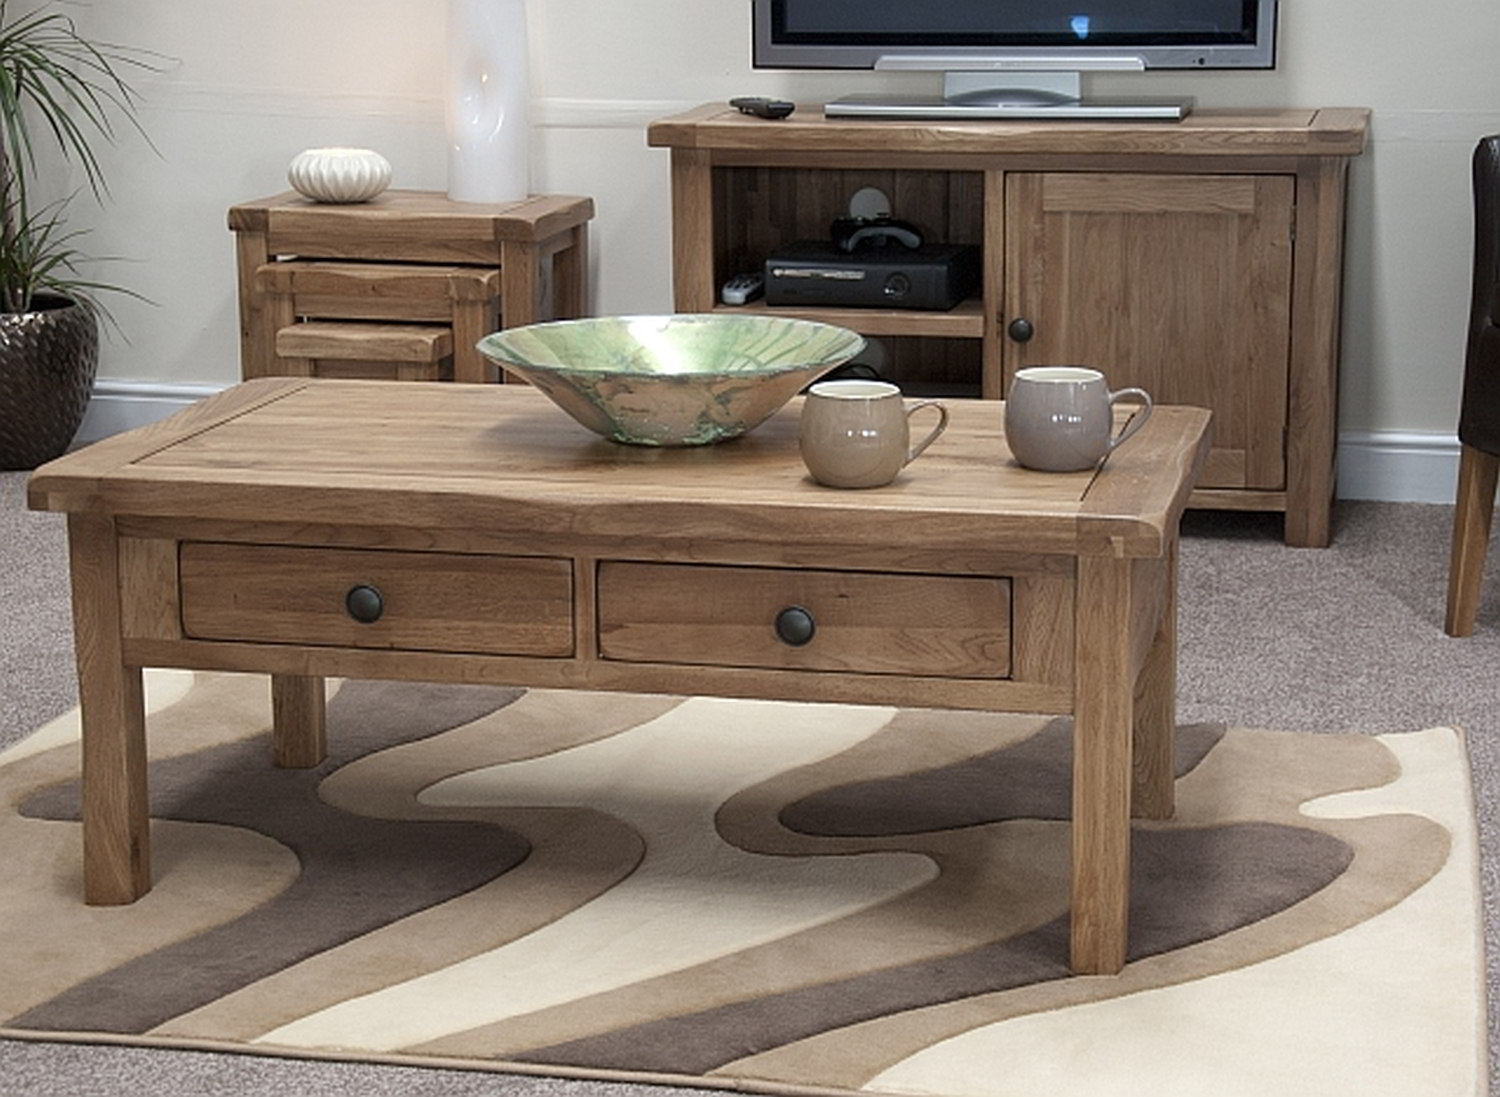 high end coffee tables create interesting look living rustic made solid wood with double drawer underneath some ceramic its top for centerpiece and completed rug under the table